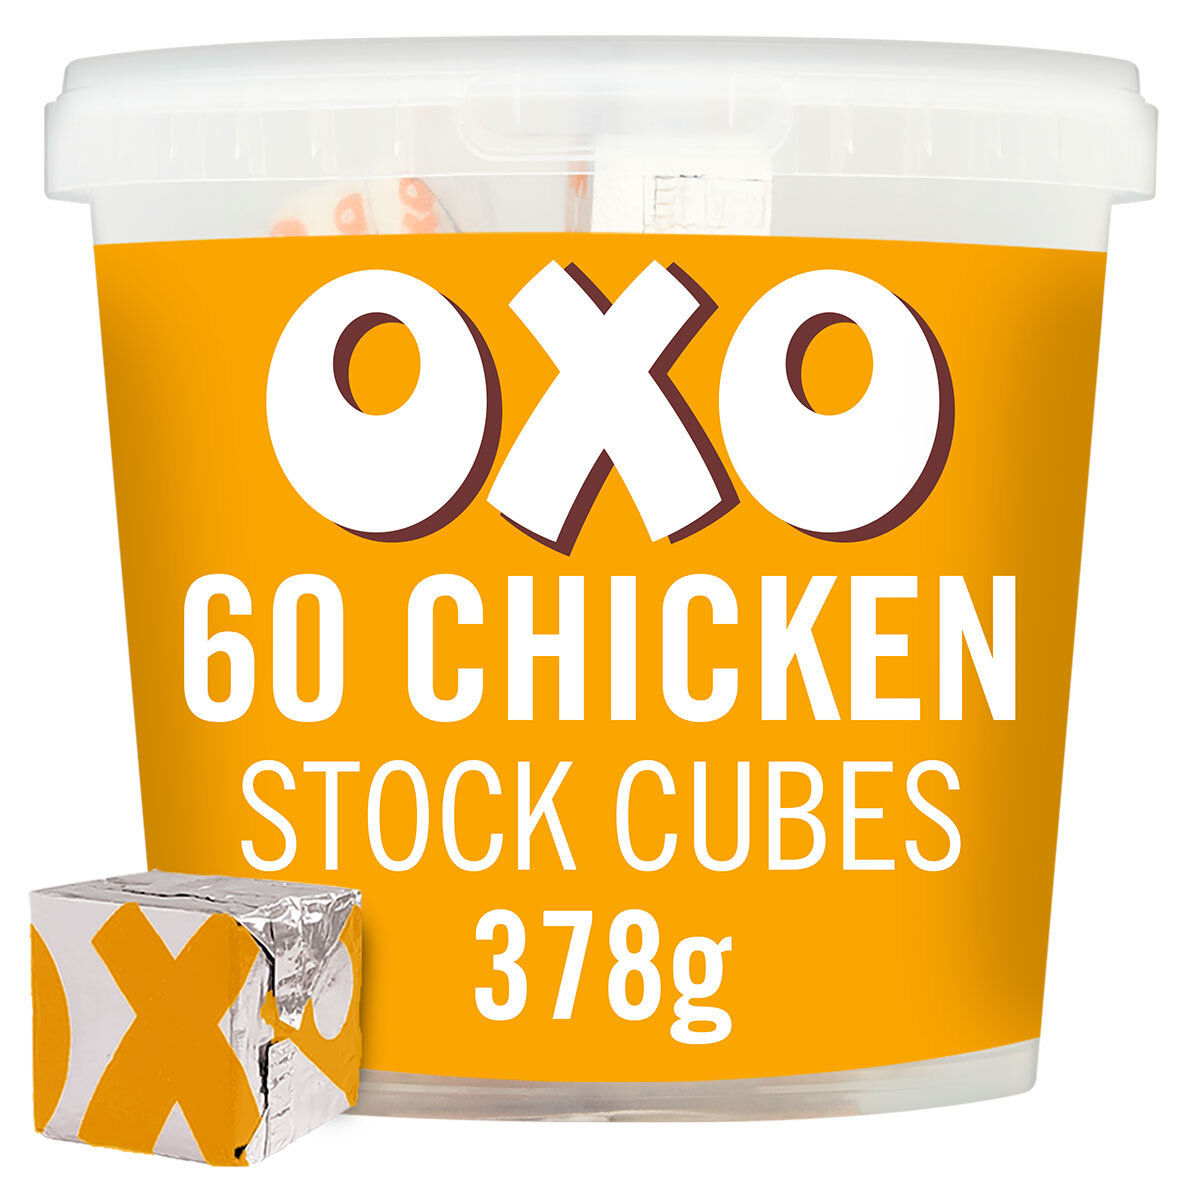 OXO Chicken Stock Cubes, 60 Pack